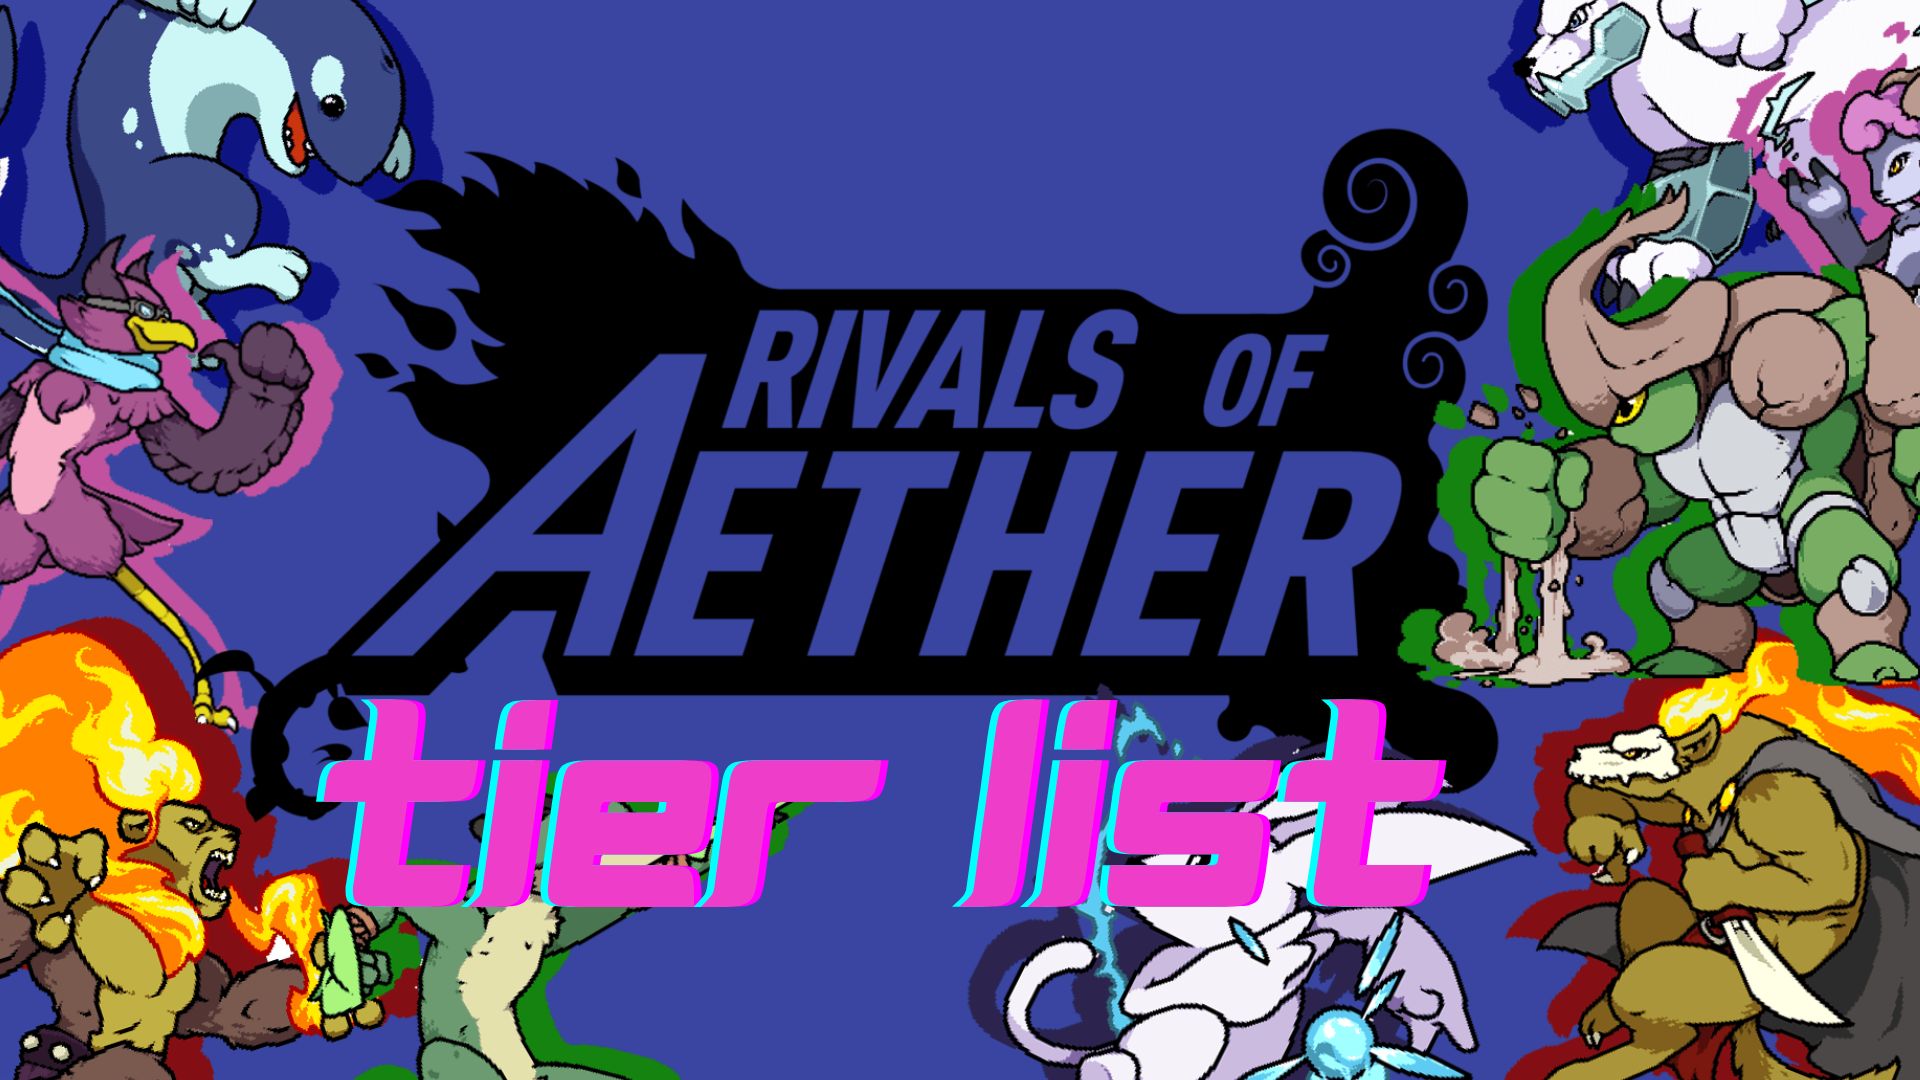 creatures of aether rival tier list